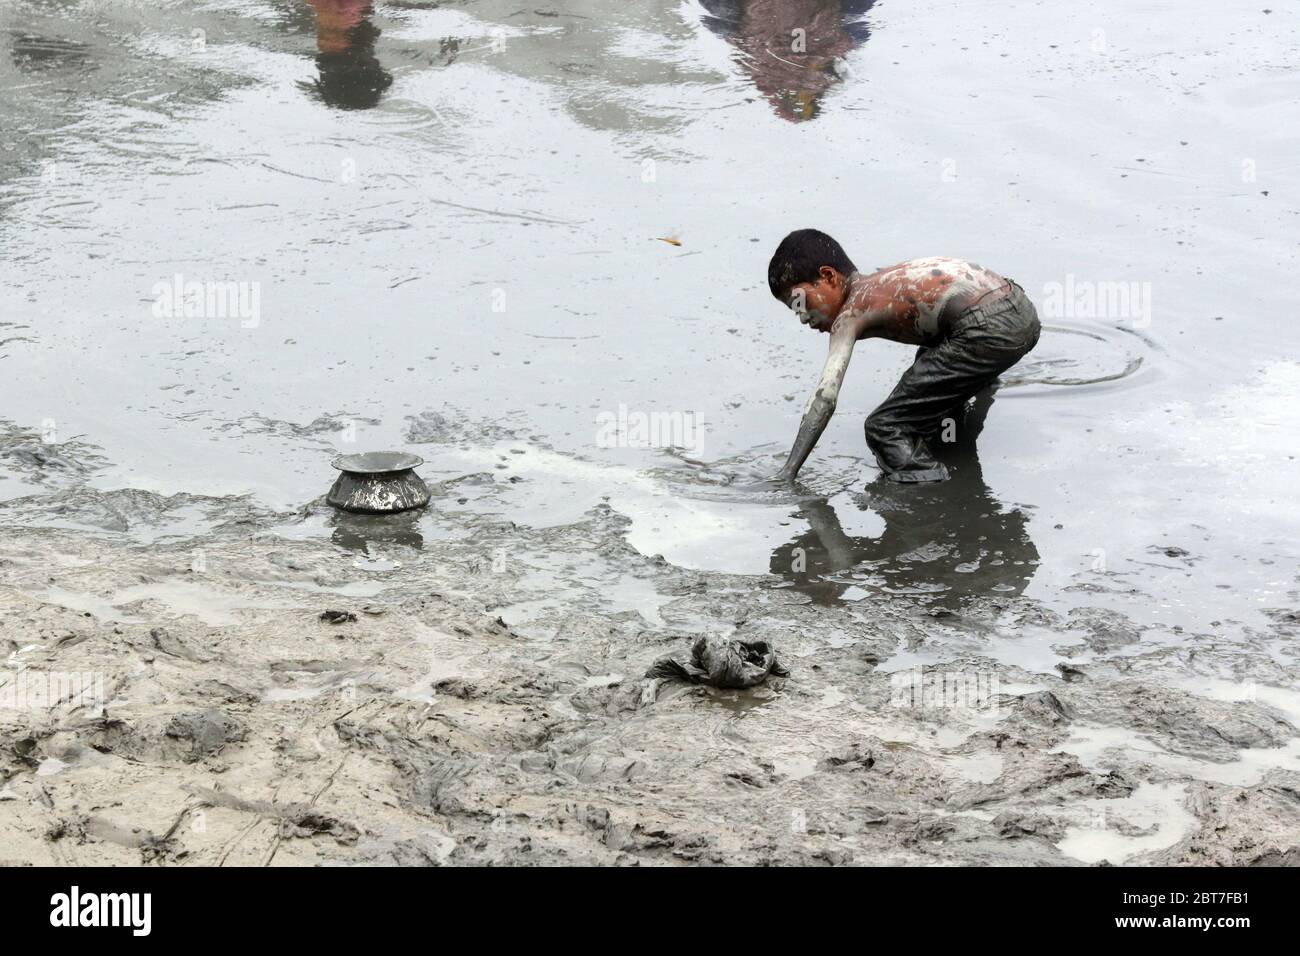 Dhaka 23 April 2015.A village boy catching fish in a river at savar in Dhaka.photo by leadfoto Stock Photo